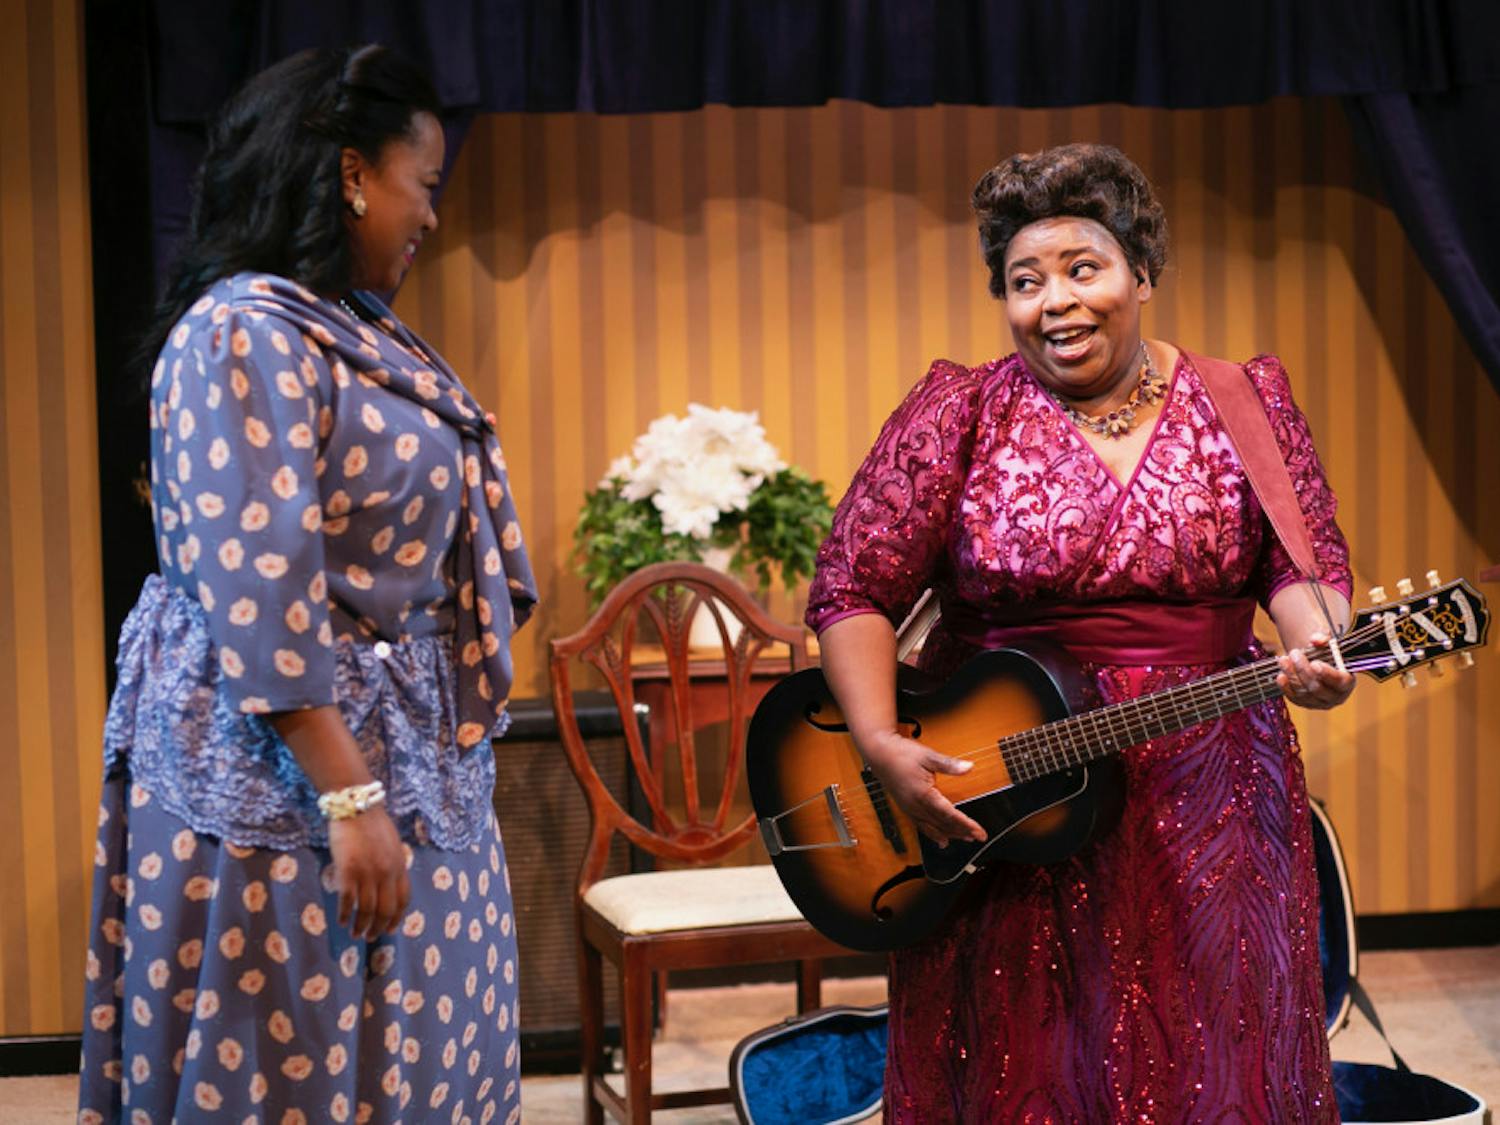 Hillary Scales-Lewis and Illeana Kirven in "Marie and Rosetta." Guitar player and gospel singer Sister Rosetta Tharpe is recognized today as a pioneer of rock 'n' roll.